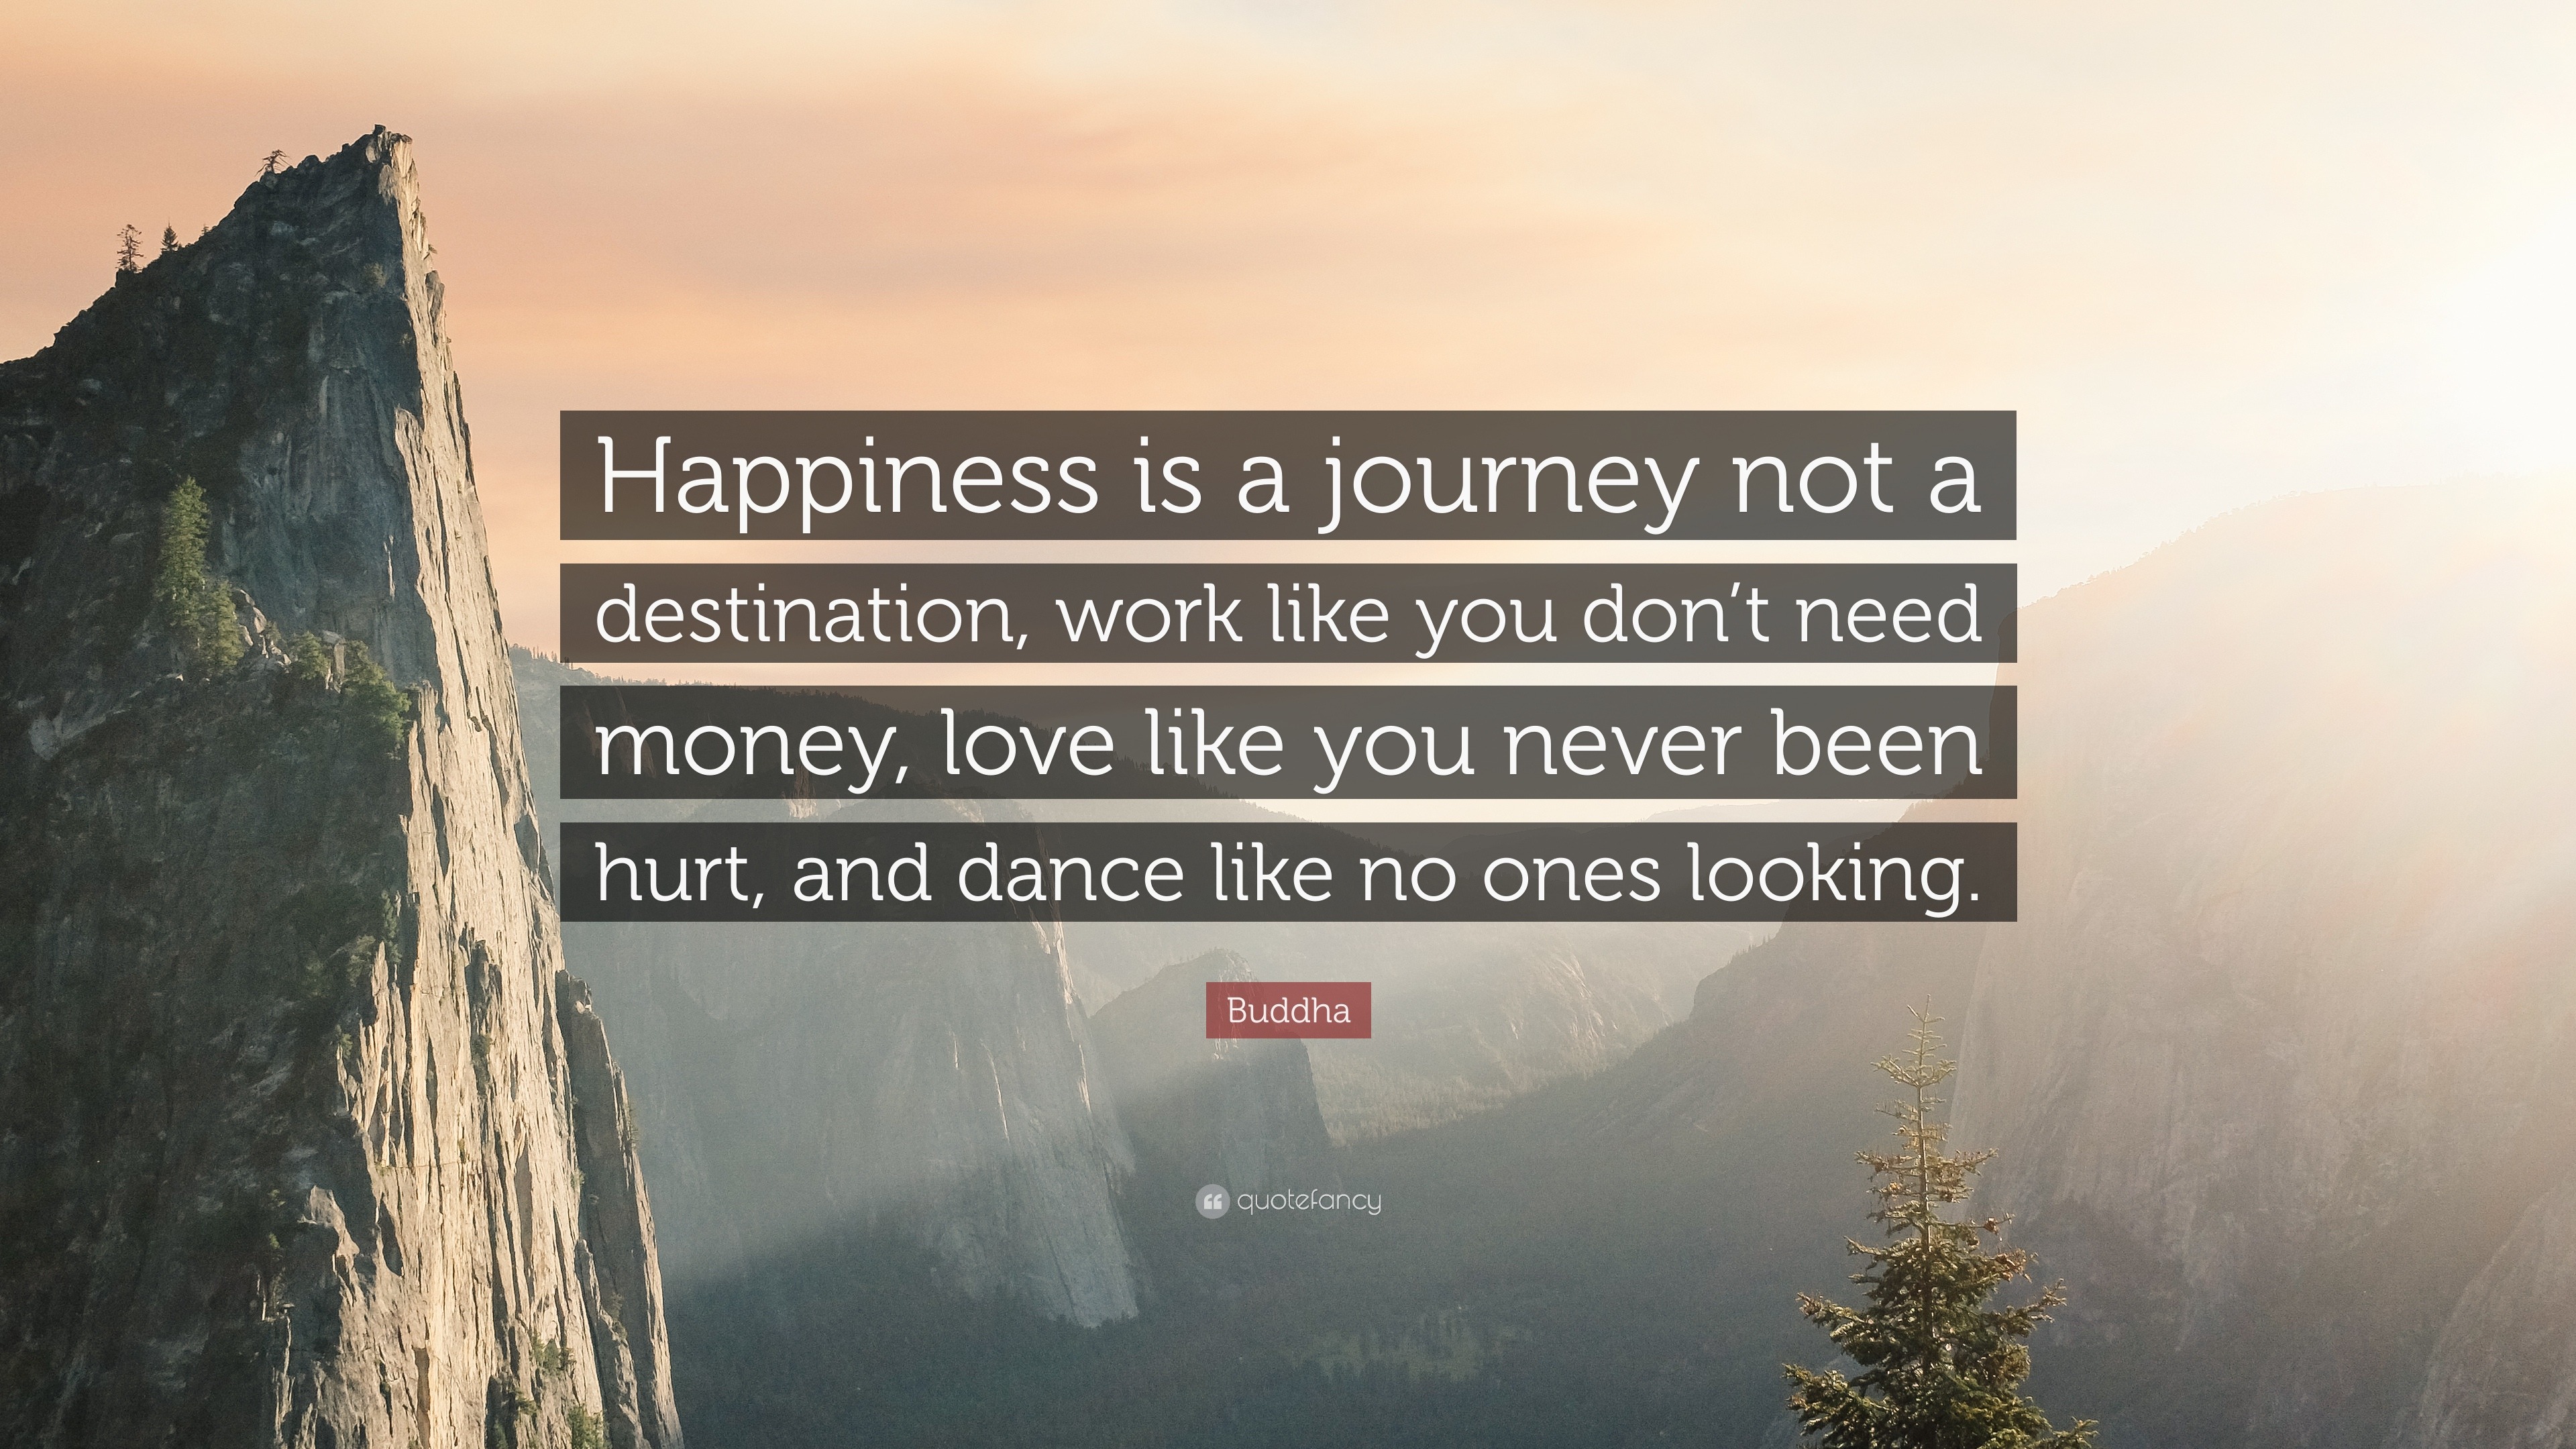 Buddha Quote “Happiness is a journey not a destination work like you don